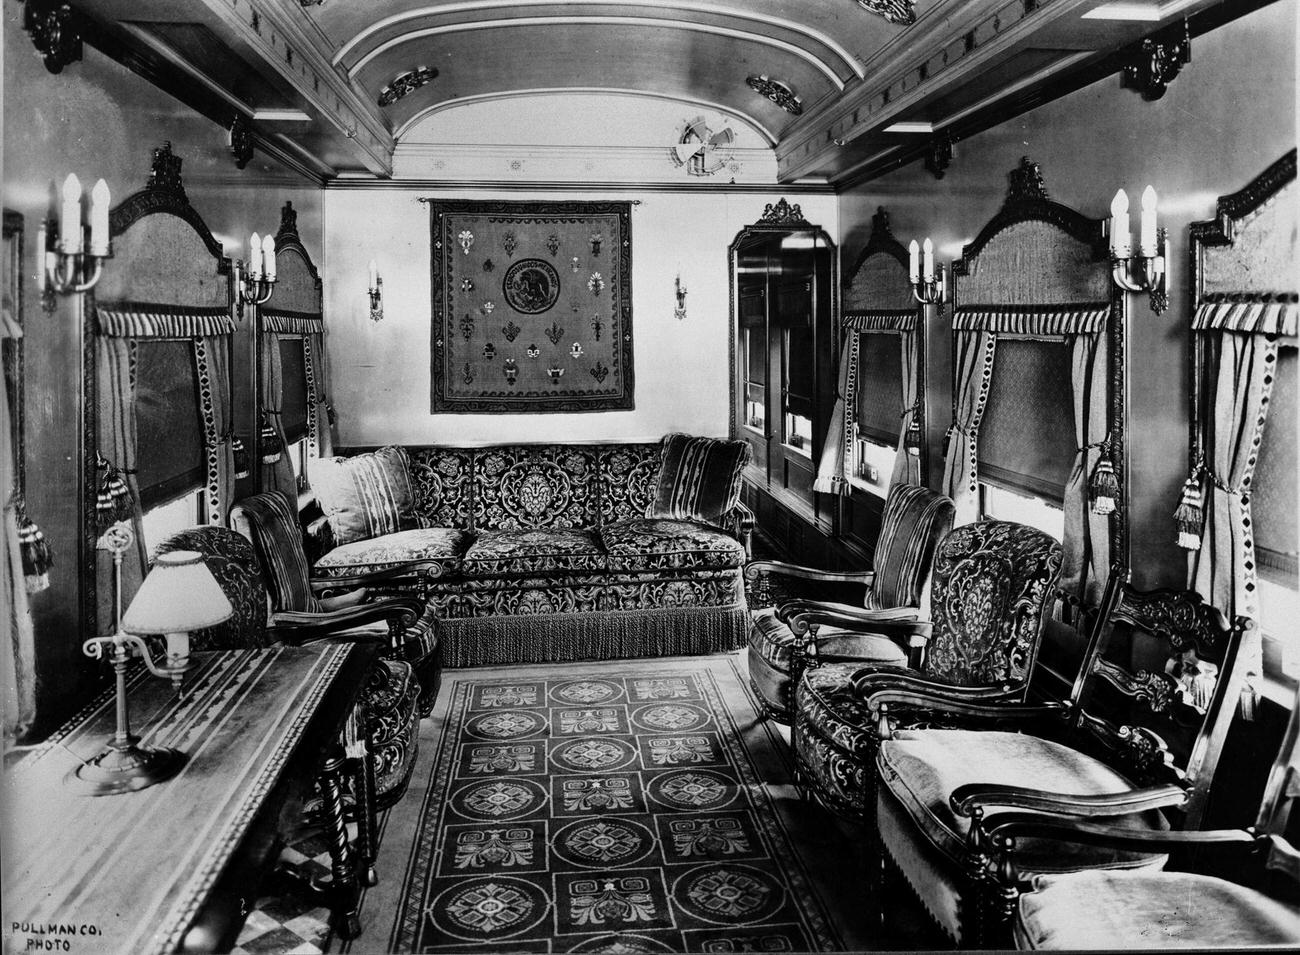 Reception room of the Mexican presidential train presented at the World's Fair of Chicago, 1933.